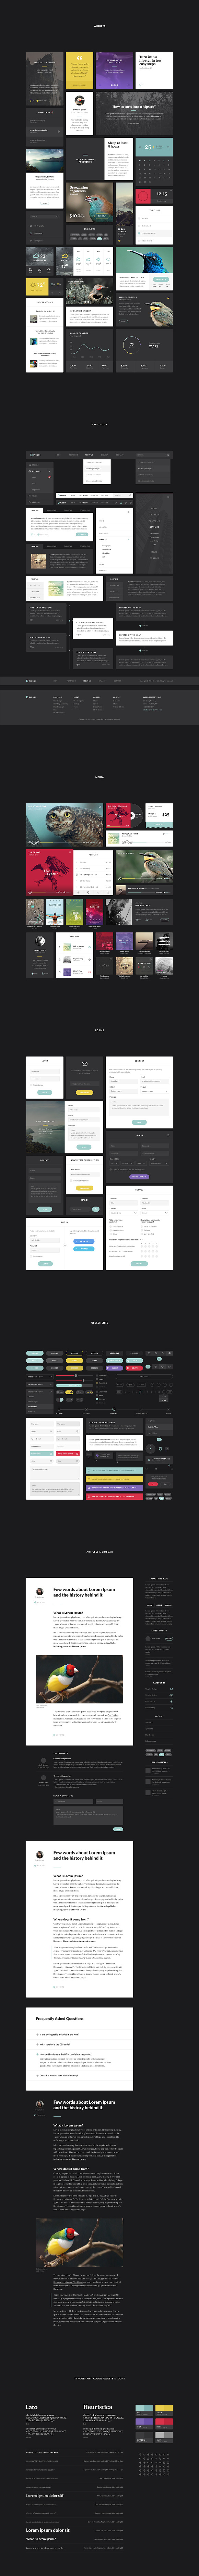 Aves UI Kit in UI Kits and Libraries - product preview 1